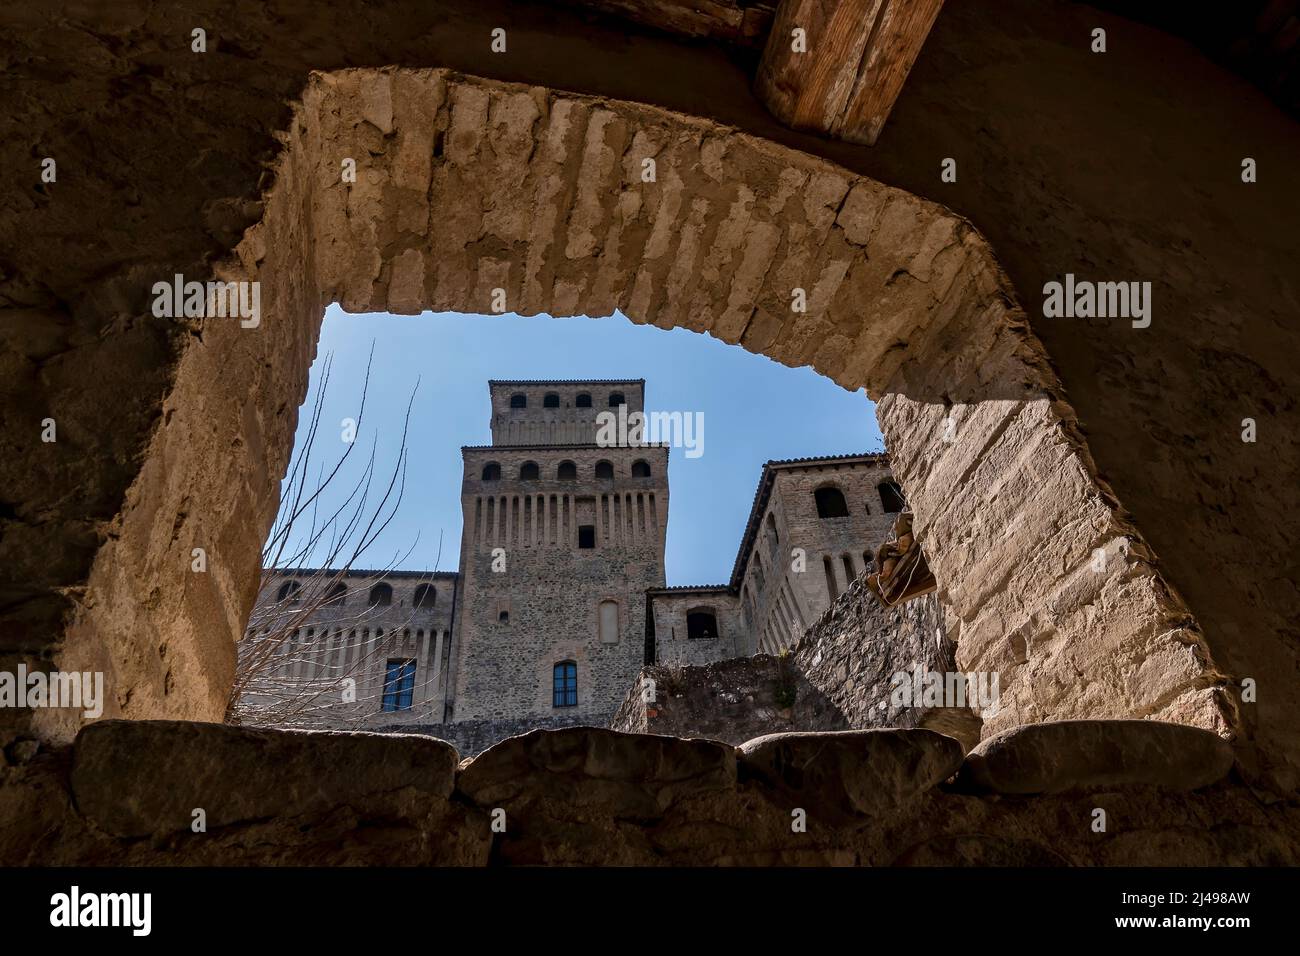 A detail of the castle of Torrechiara, Parma, Italy, framed by a stone window Stock Photo